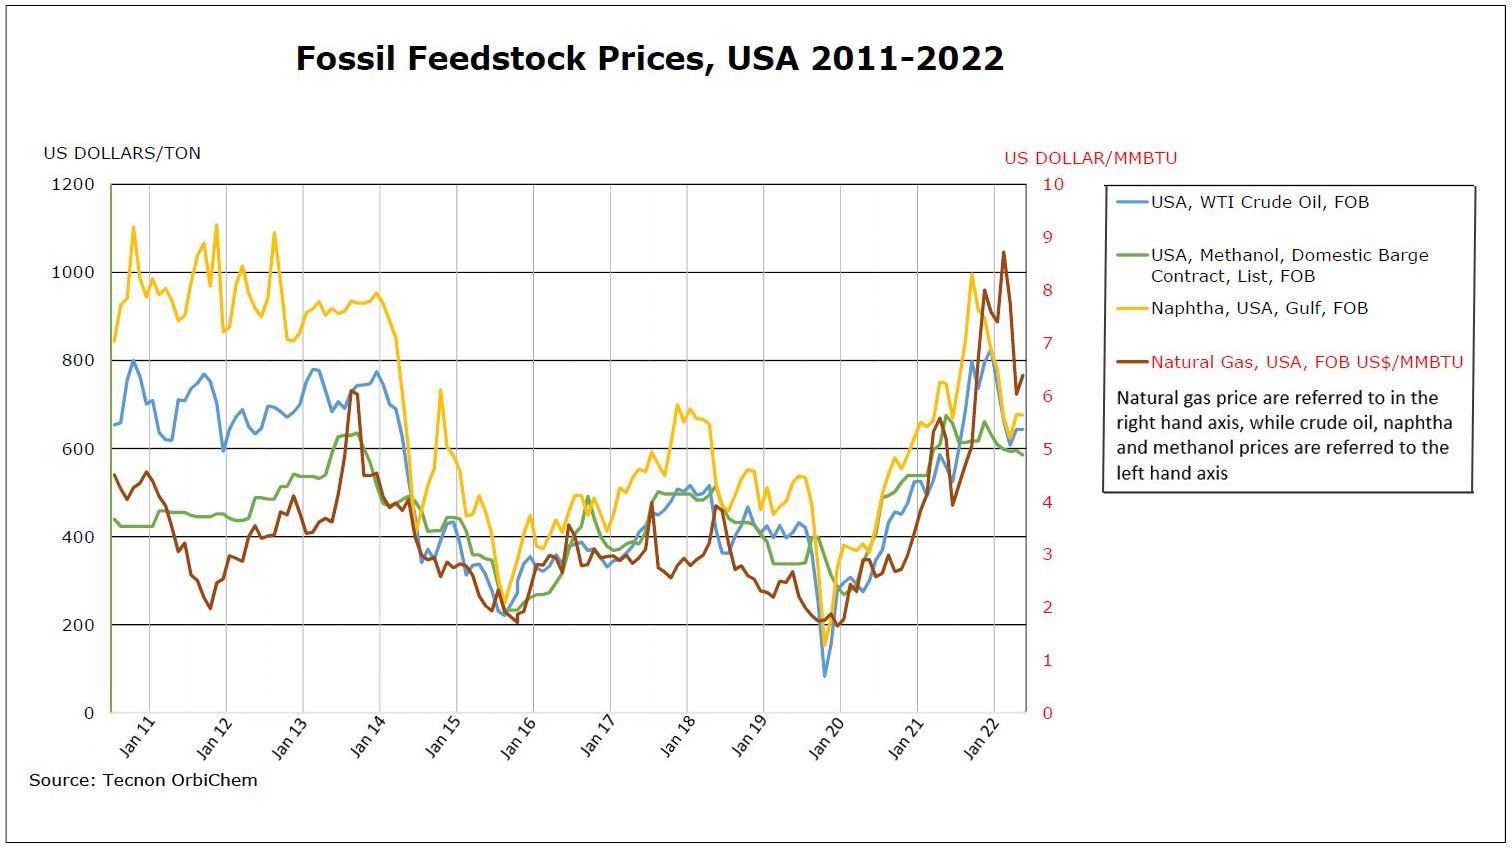 Fossil feedstock prices rose exponentially in recent years, as this graph shows.